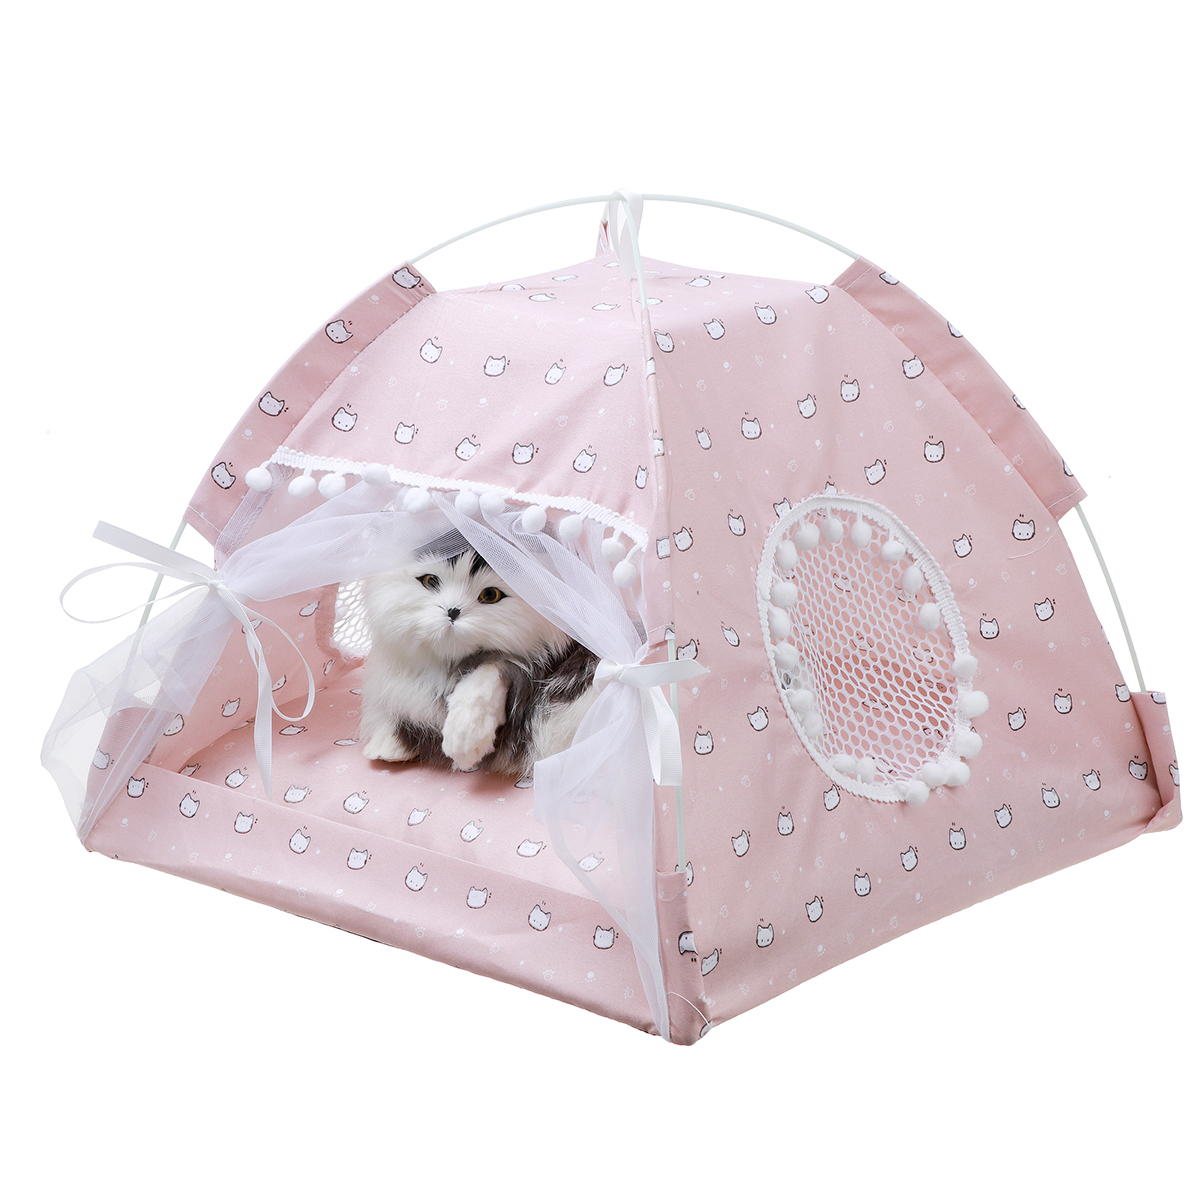 Pet-Tent-Cat-Bed-Puppy-House-Cushion-Pad-Bed-Flamingo-Pattern-Indo-1825833-7